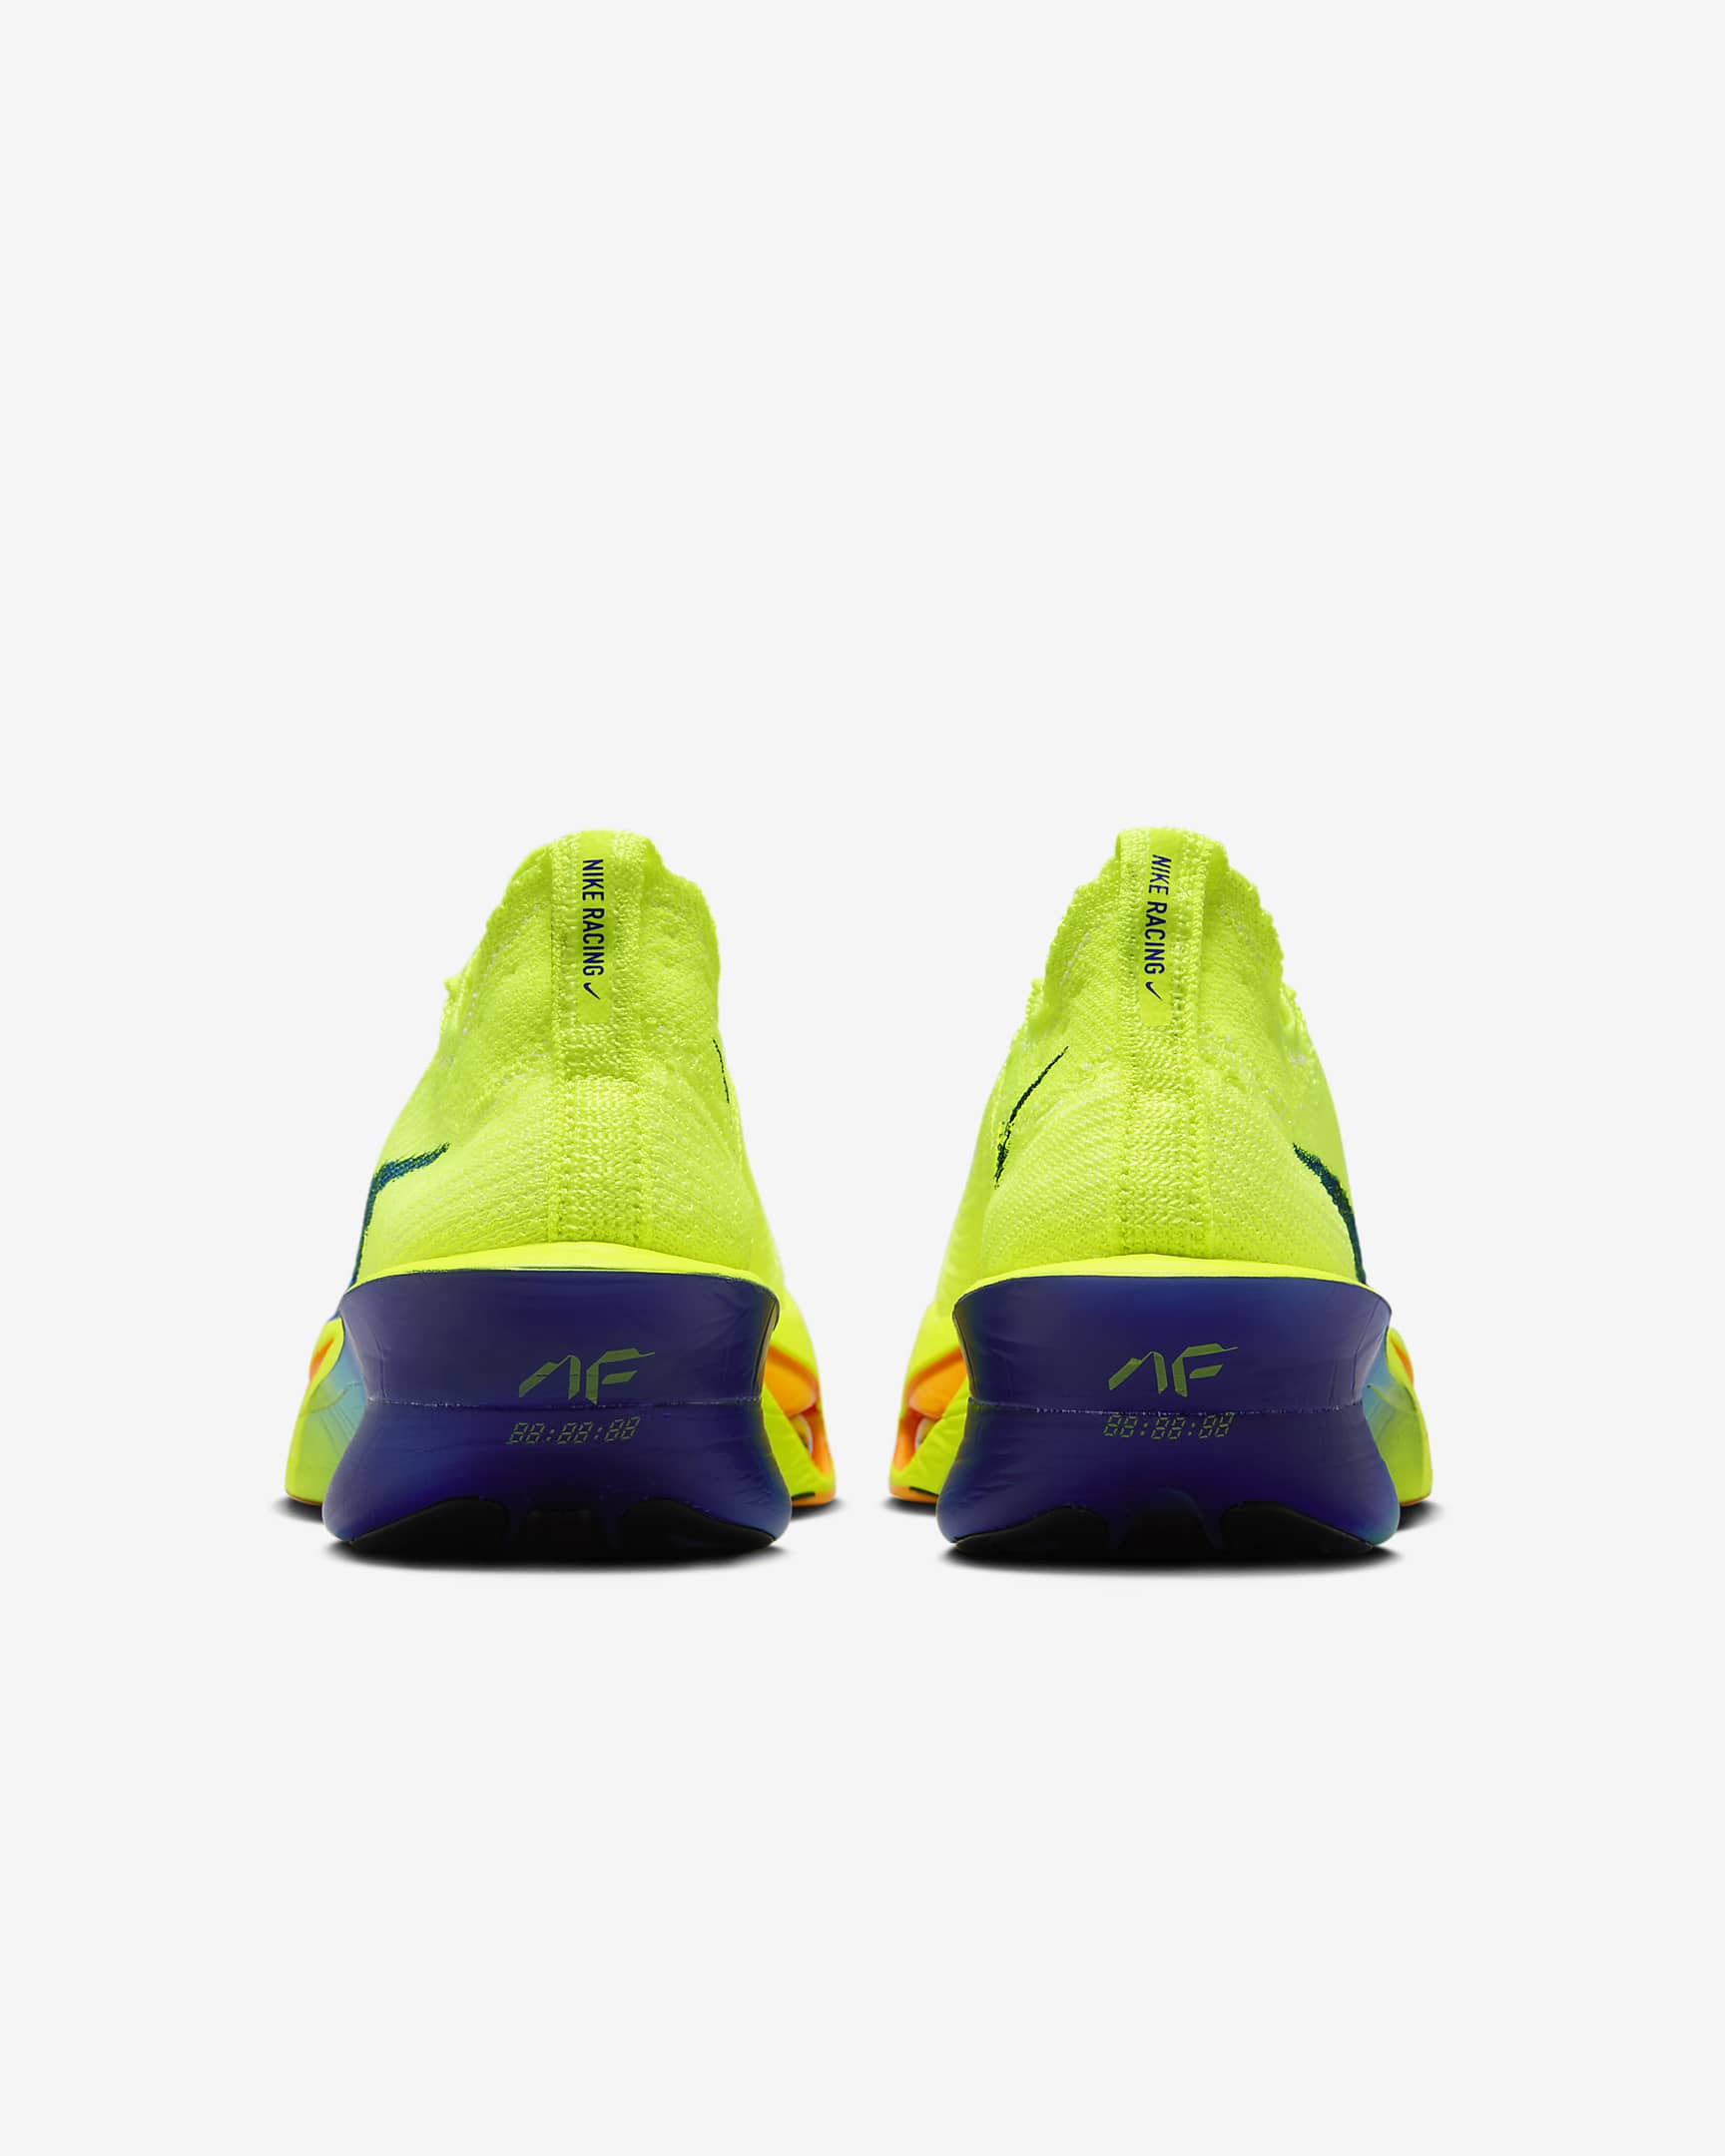 Nike Alphafly 3 Women's Road Racing Shoes - Volt/Dusty Cactus/Total Orange/Concord